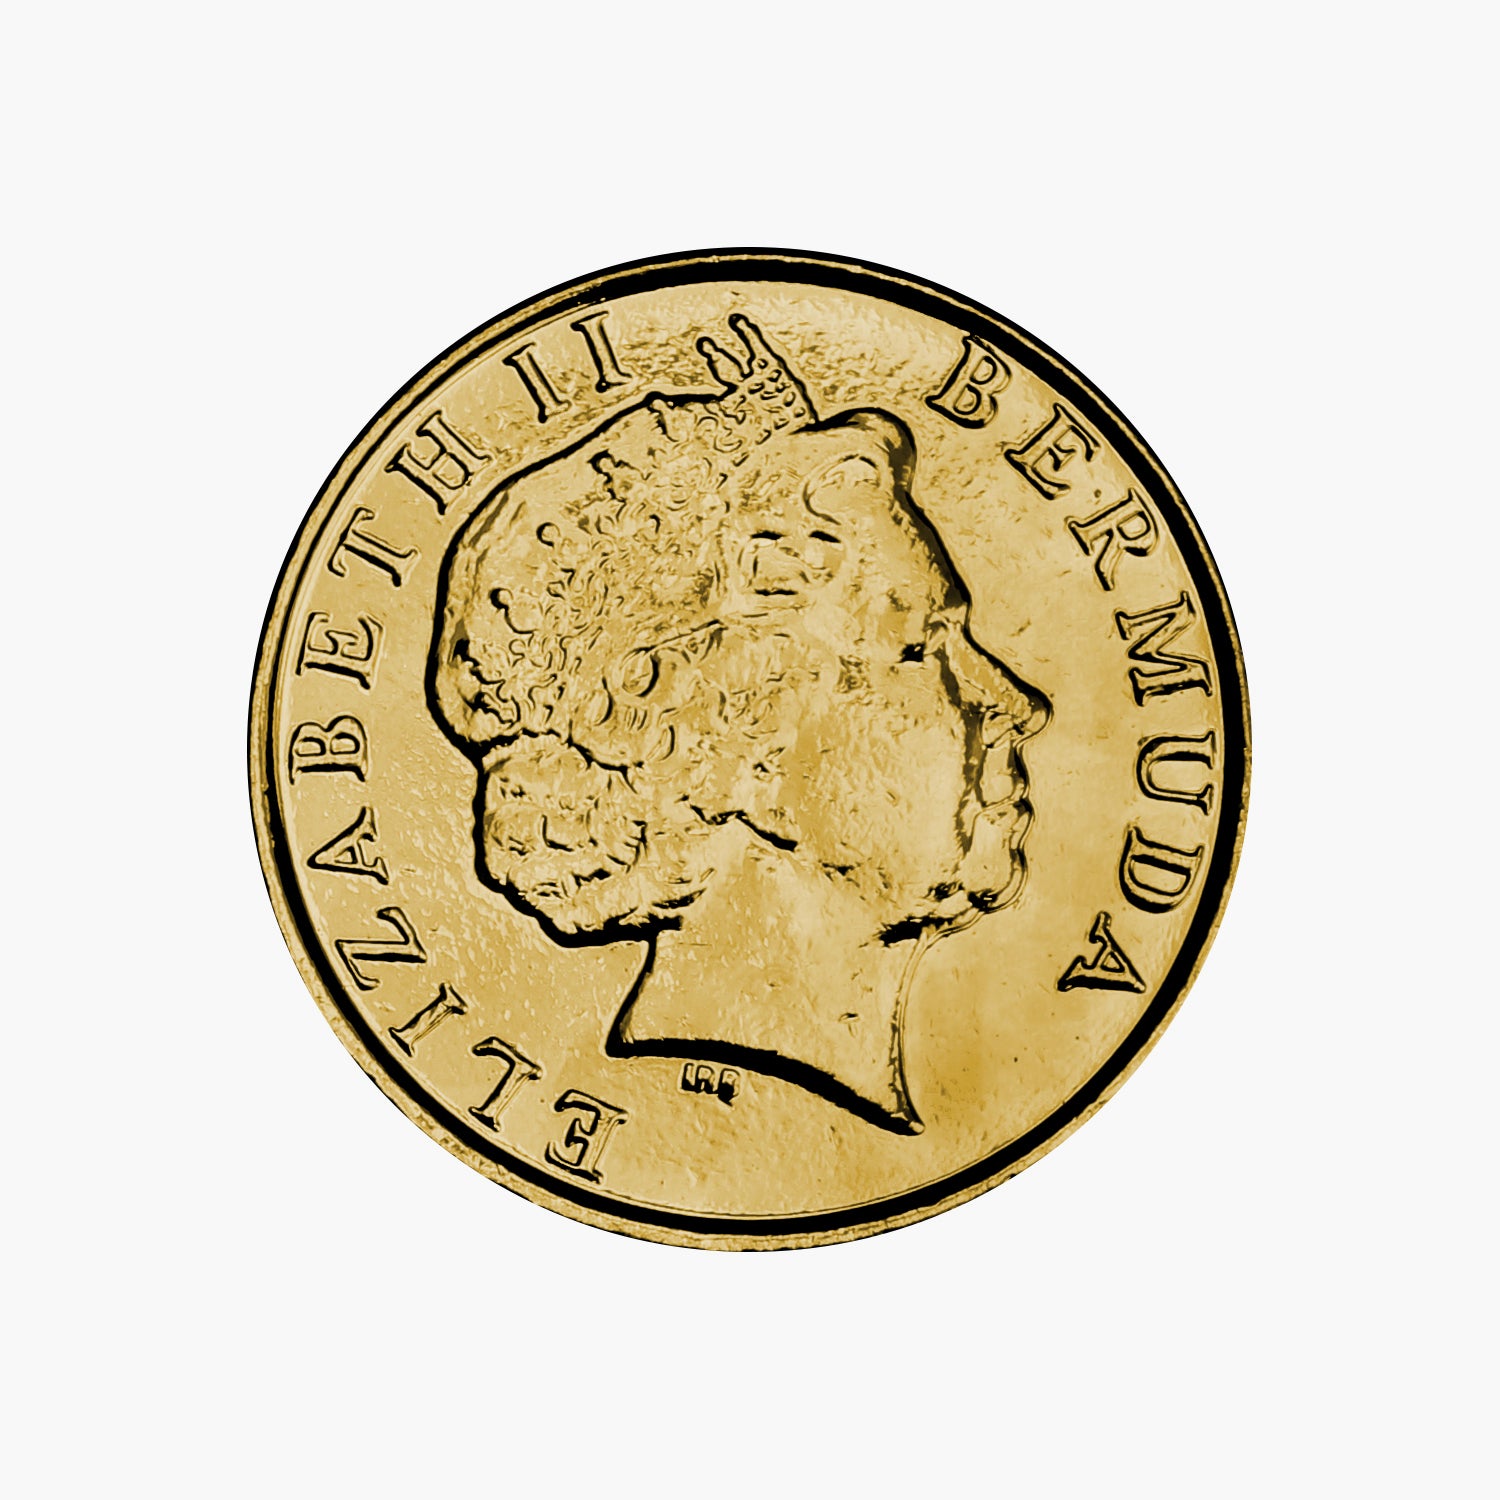 The Lucky Pig Coin